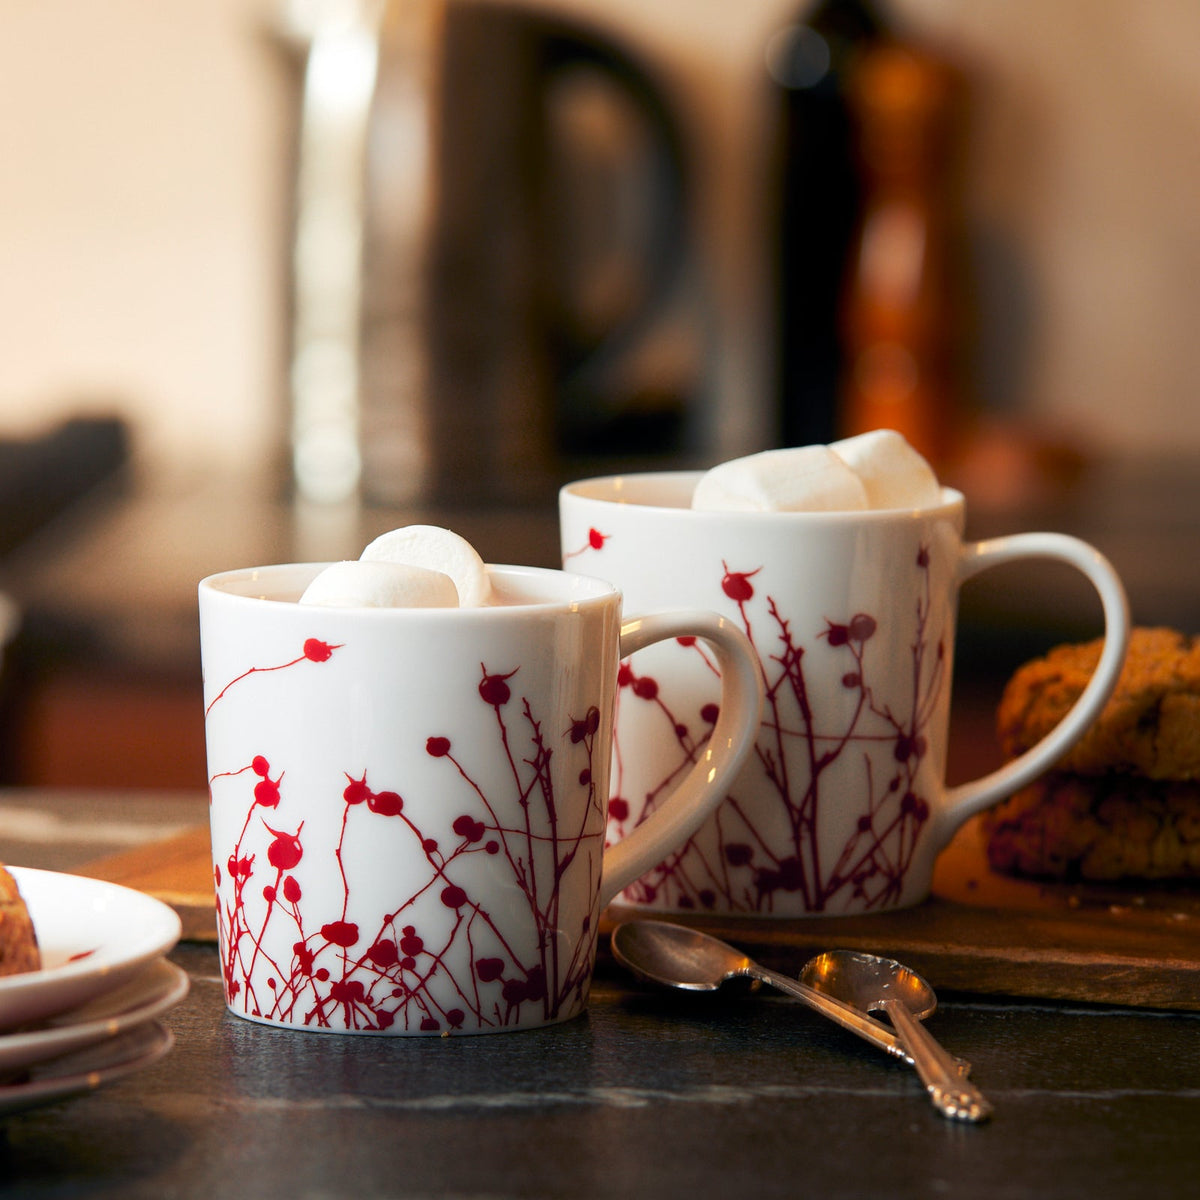 A Caskata Holiday Mugs Mixed Set of 12, with red flowers on it, perfect for enjoying hot chocolate during the holiday season.